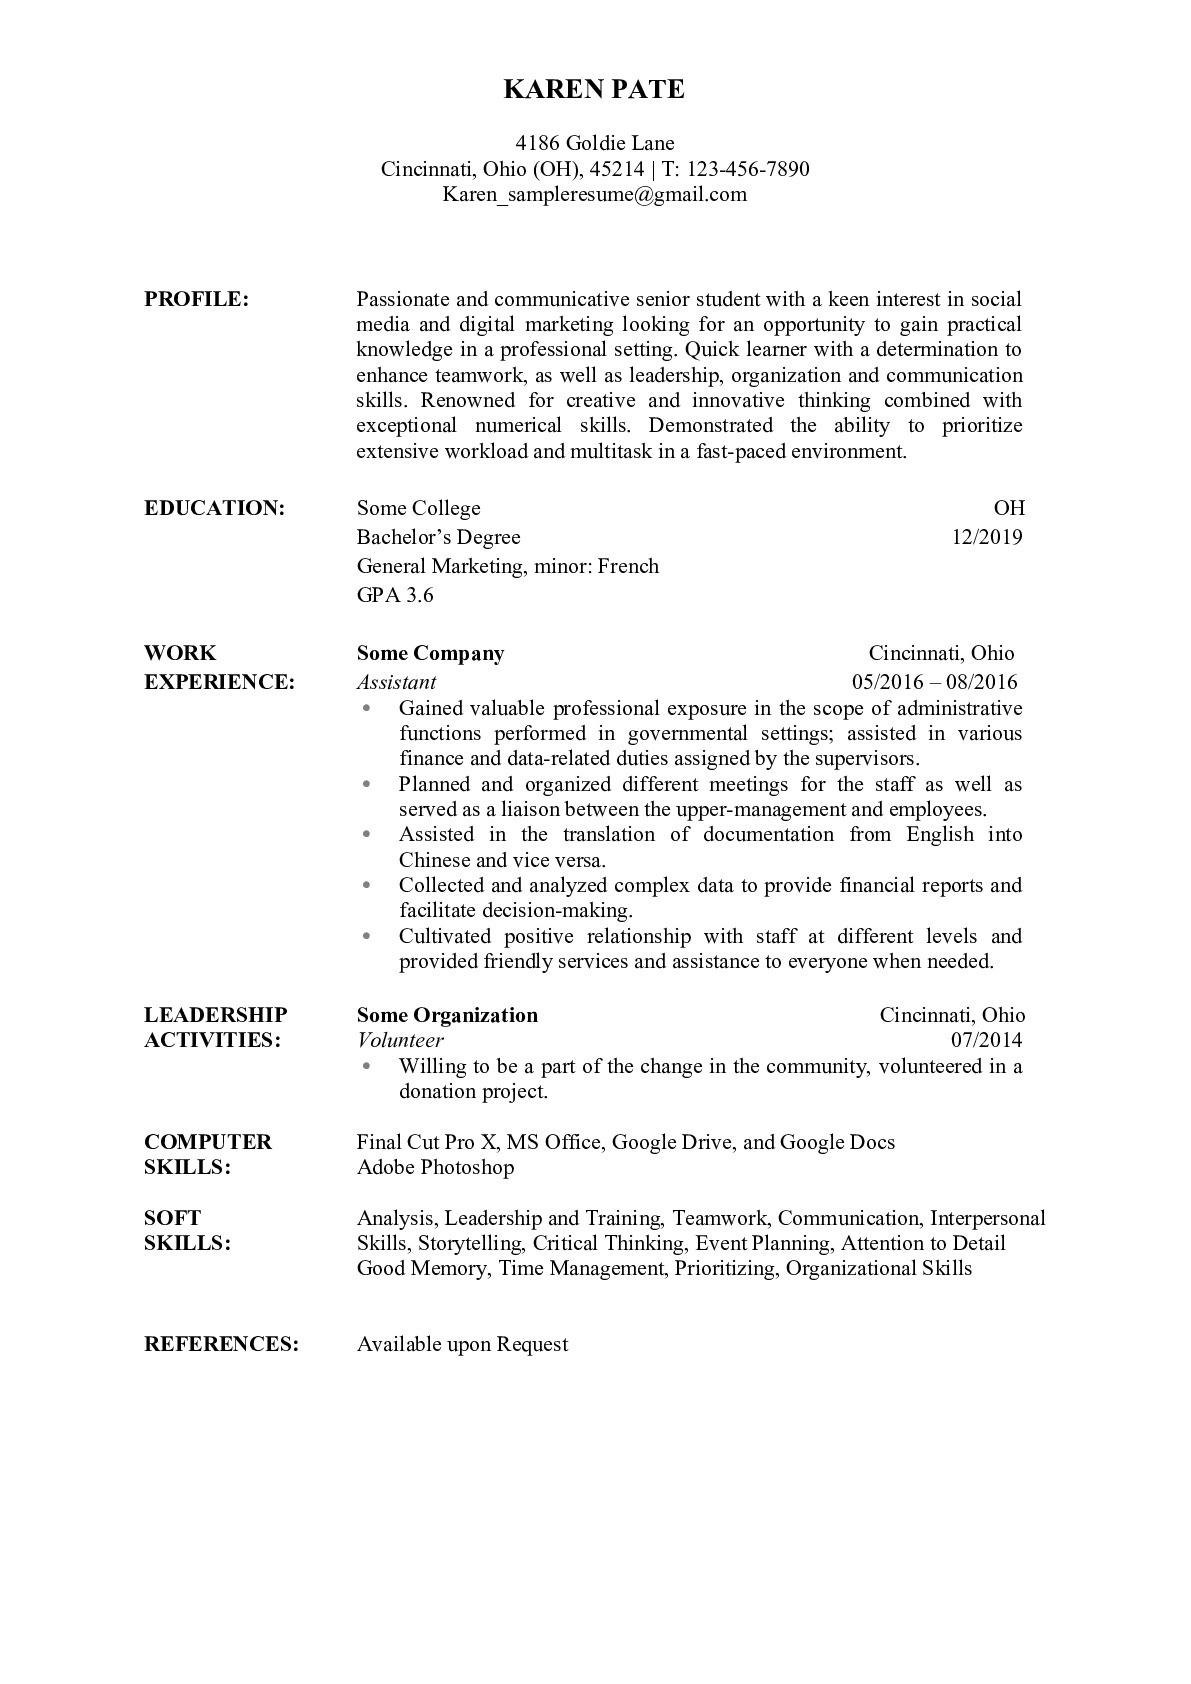 Resume Example for College student